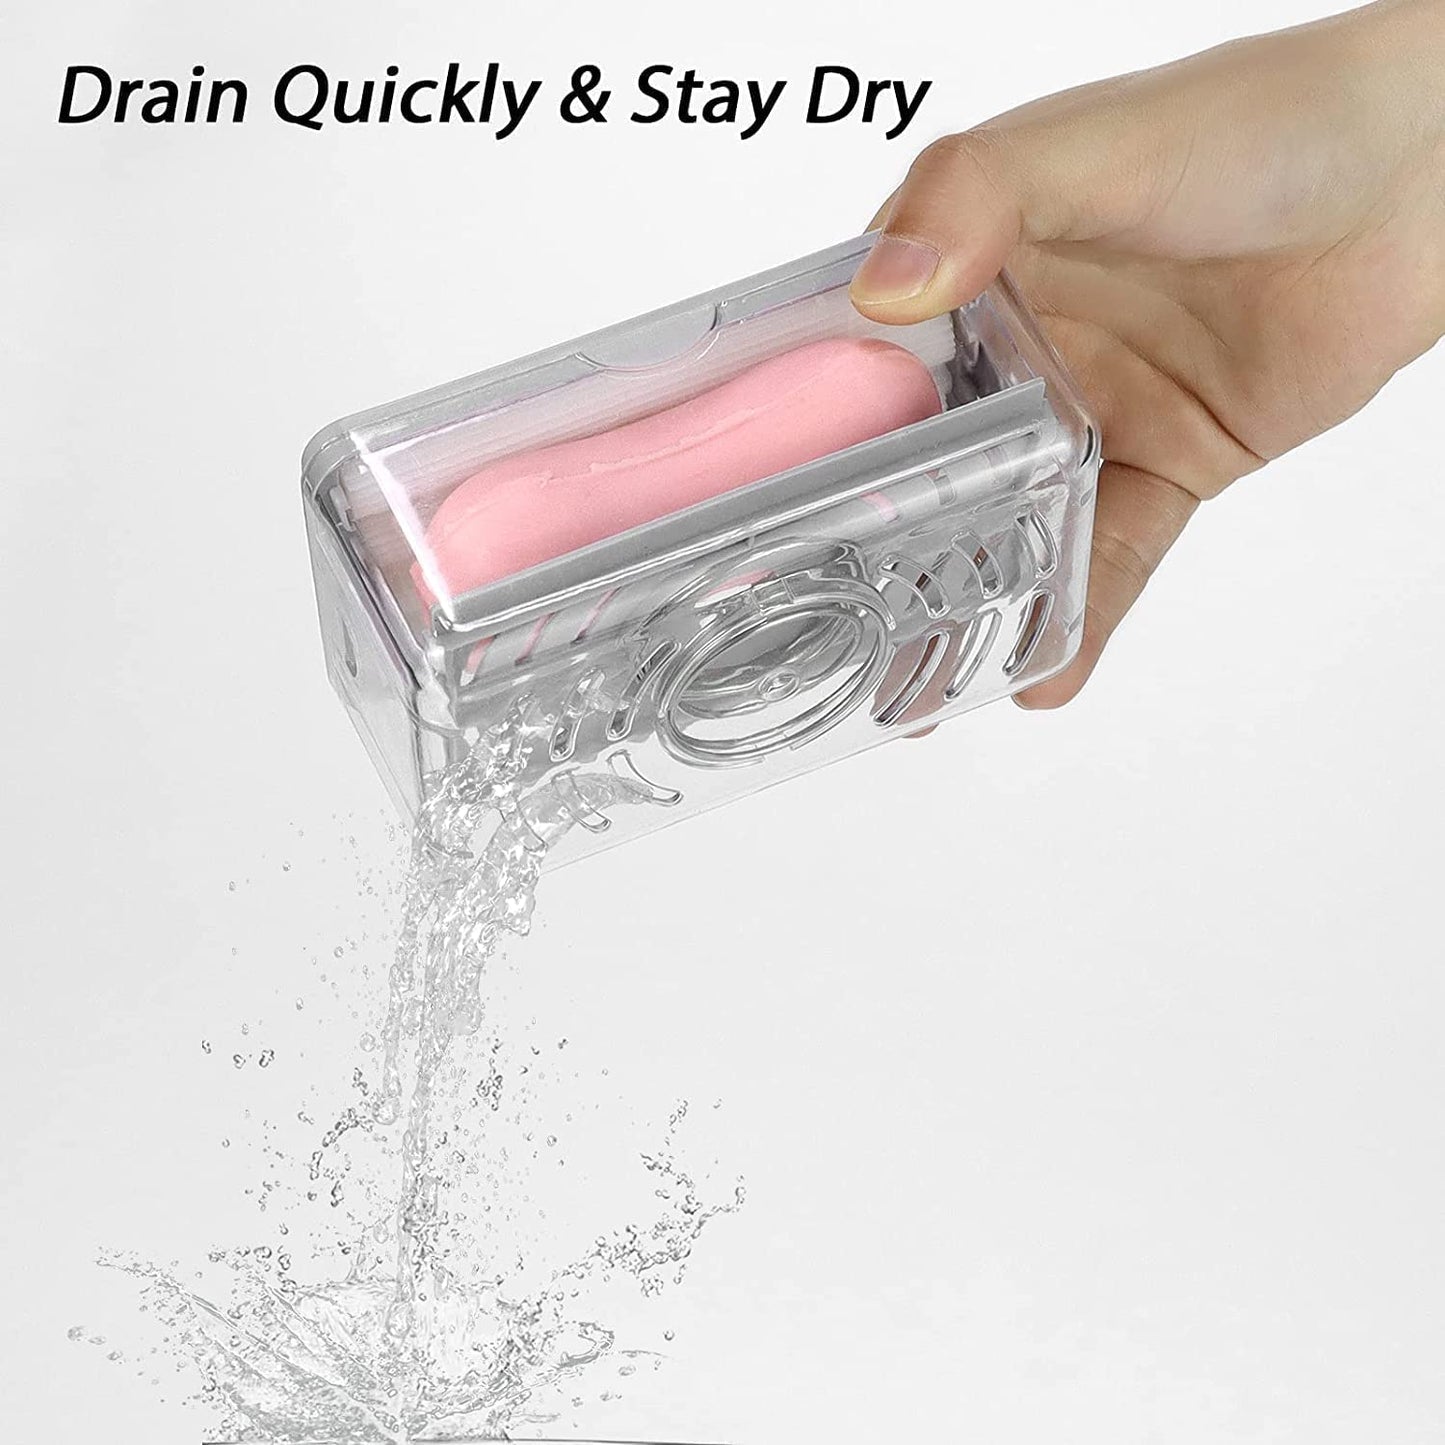 2-IN-1 PORTABLE SOAP ROLLER DISH & SOAP DISPENSER WITH ROLLER AND DRAIN HOLES, MULTIFUNCTIONAL SOAP HOLDER FOAMING SOAP BAR BOX FOR HOME, KITCHEN, BATHROOM